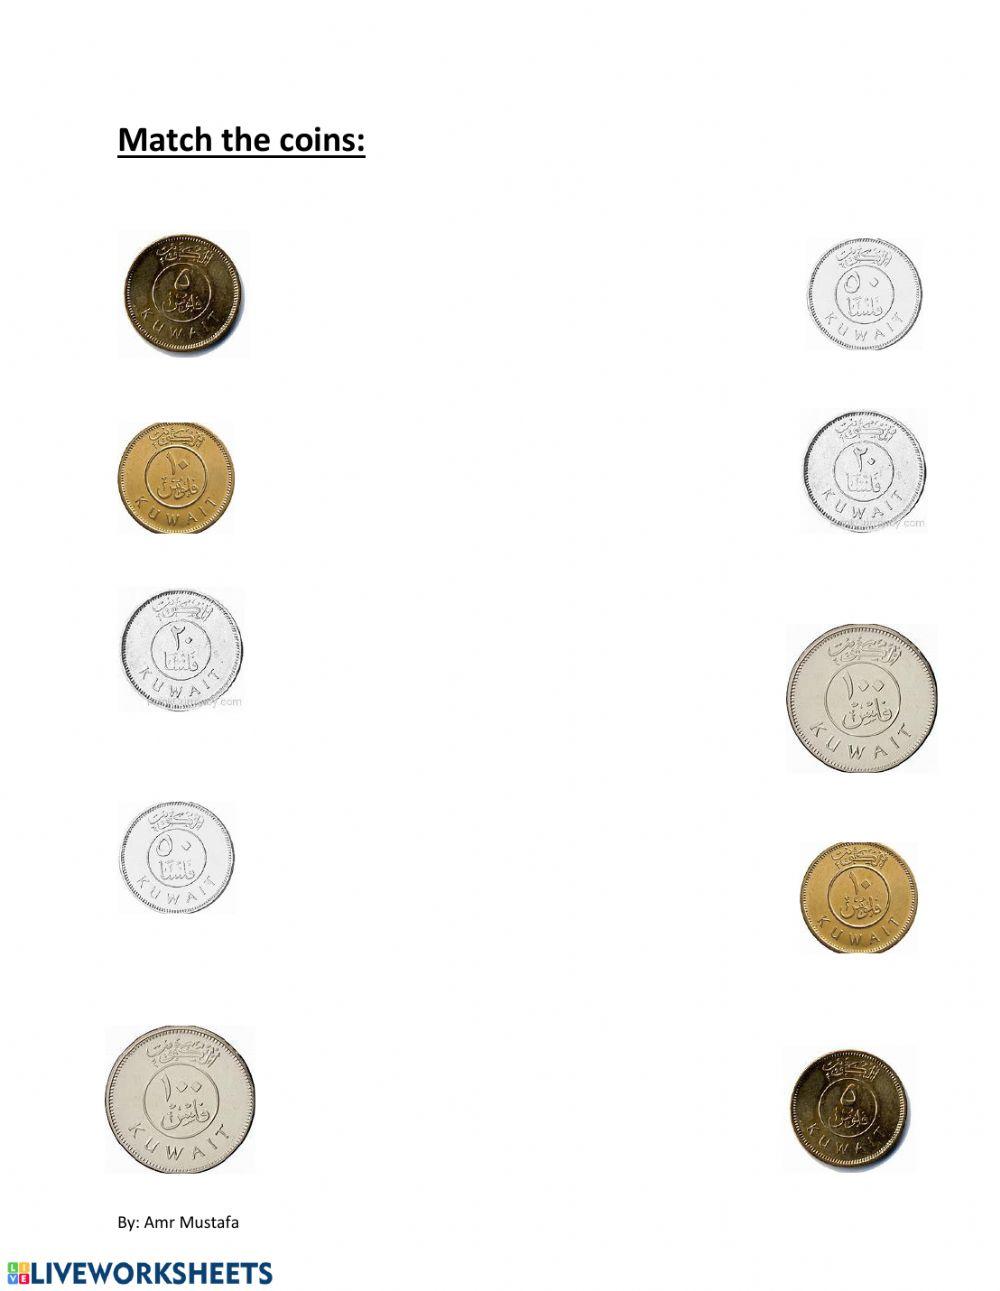 Match the coins of Kuwait